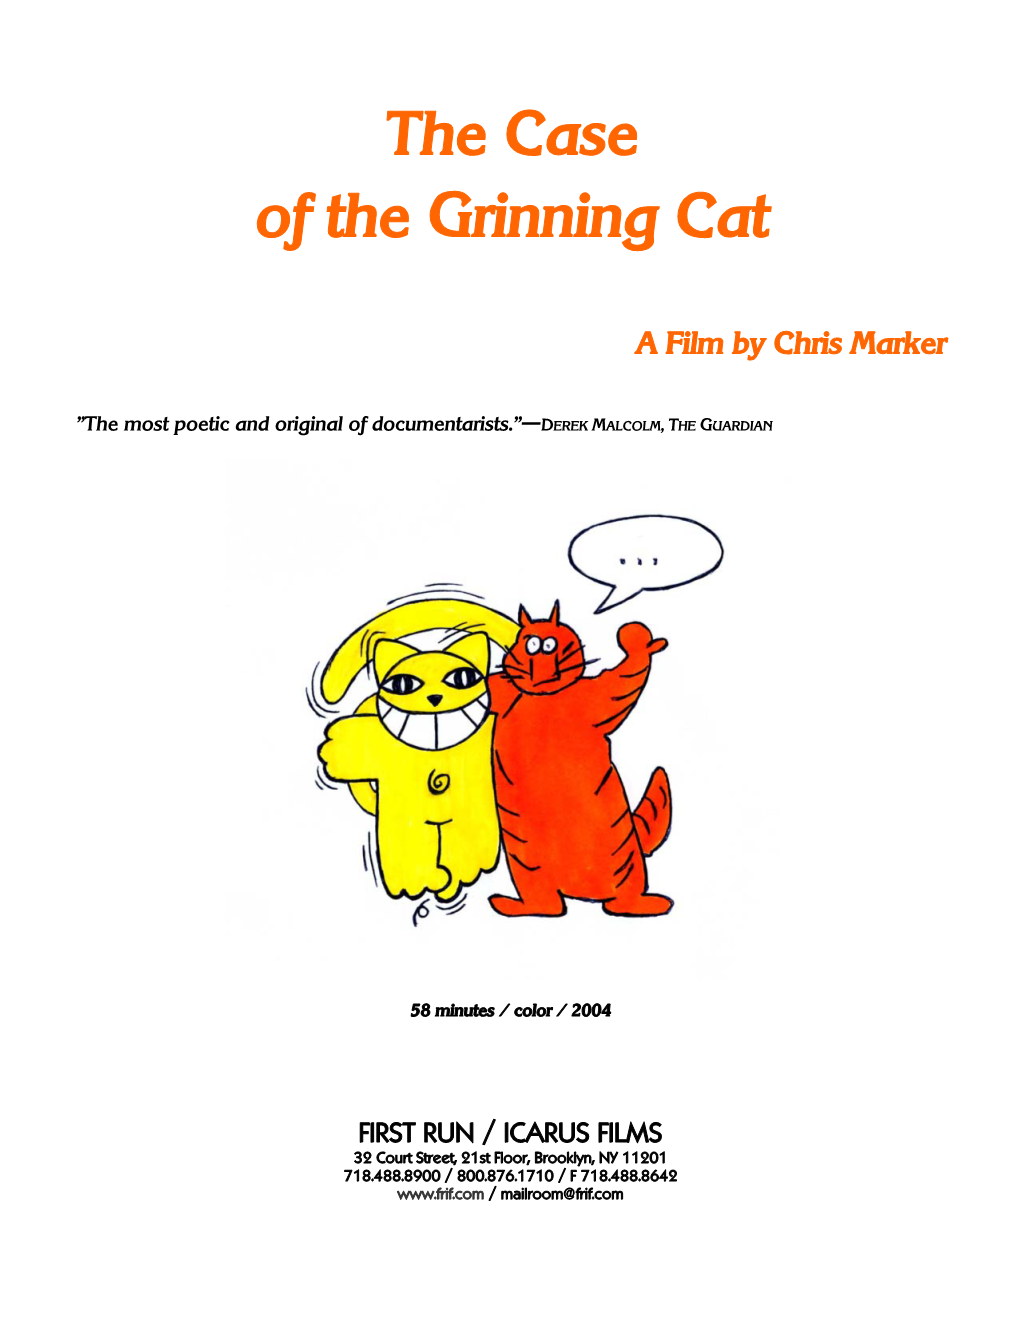 The Case of the Grinning Cat